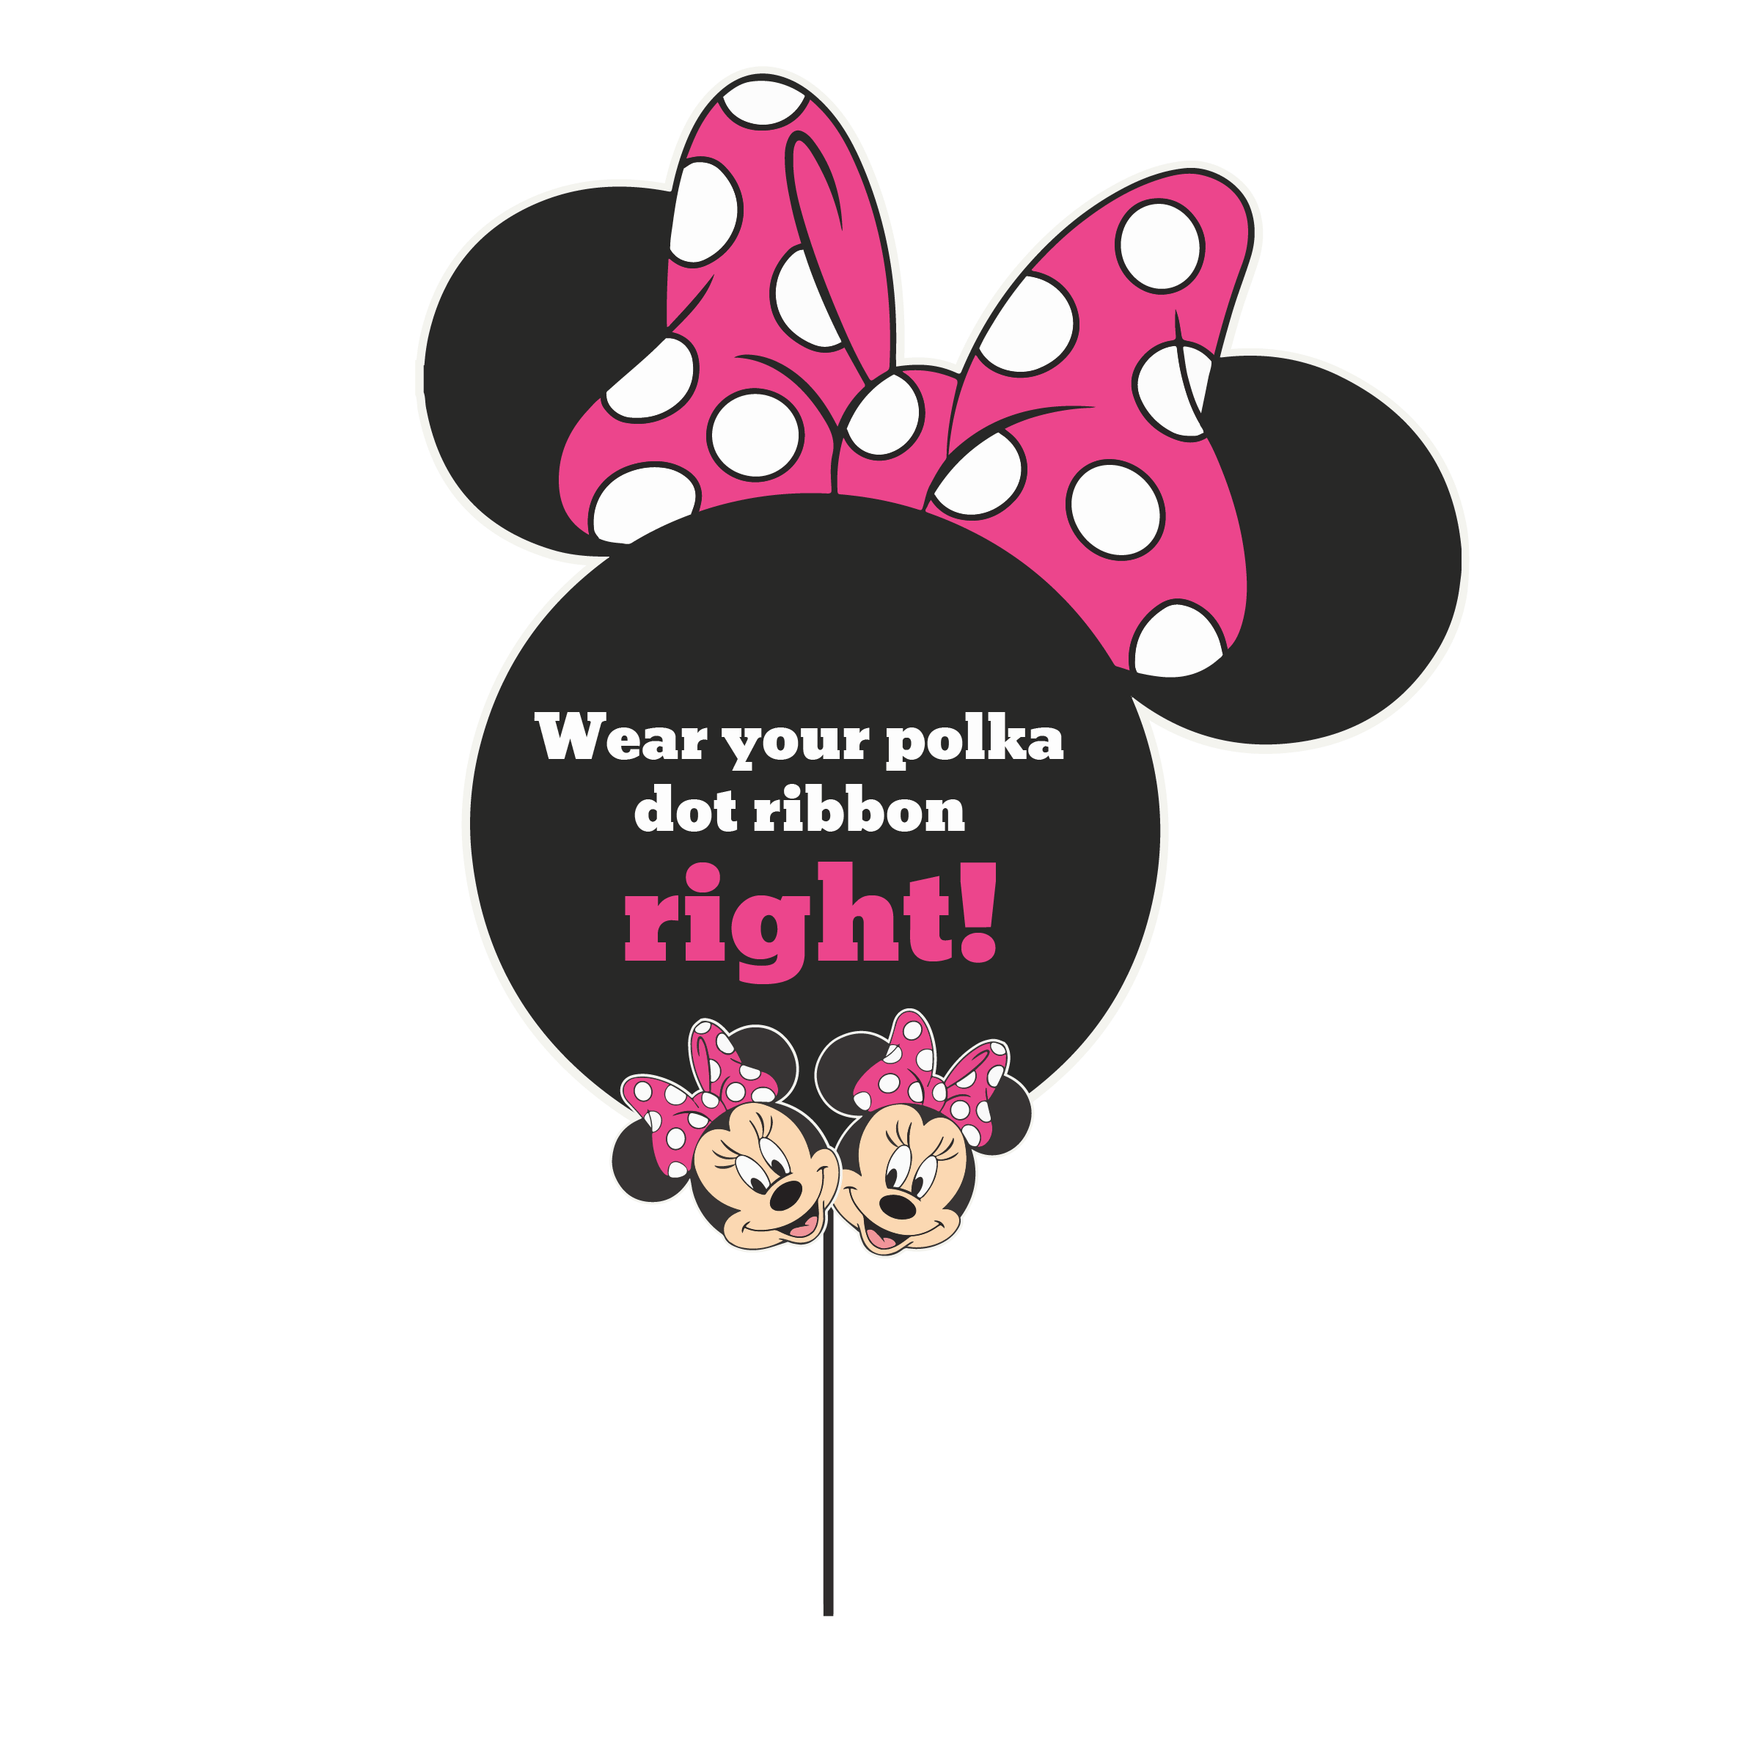 Free Minnie Mouse Cake Topper EPS, Illustrator, JPG, PNG, SVG